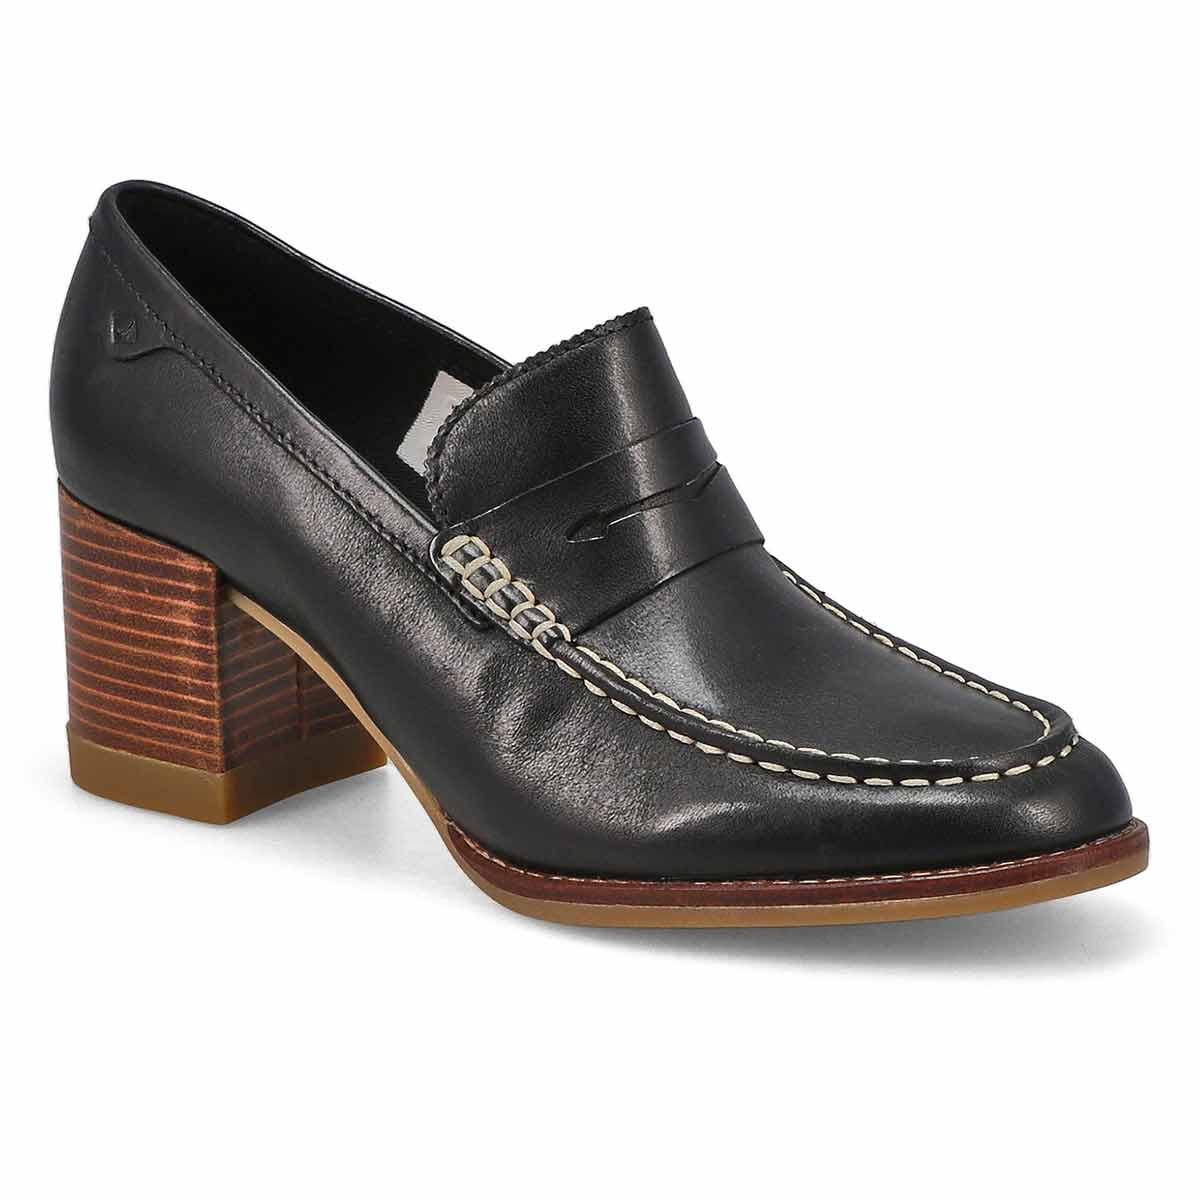 Sperry Women's Seaport Penny Heel Loafer - Bl | SoftMoc.com